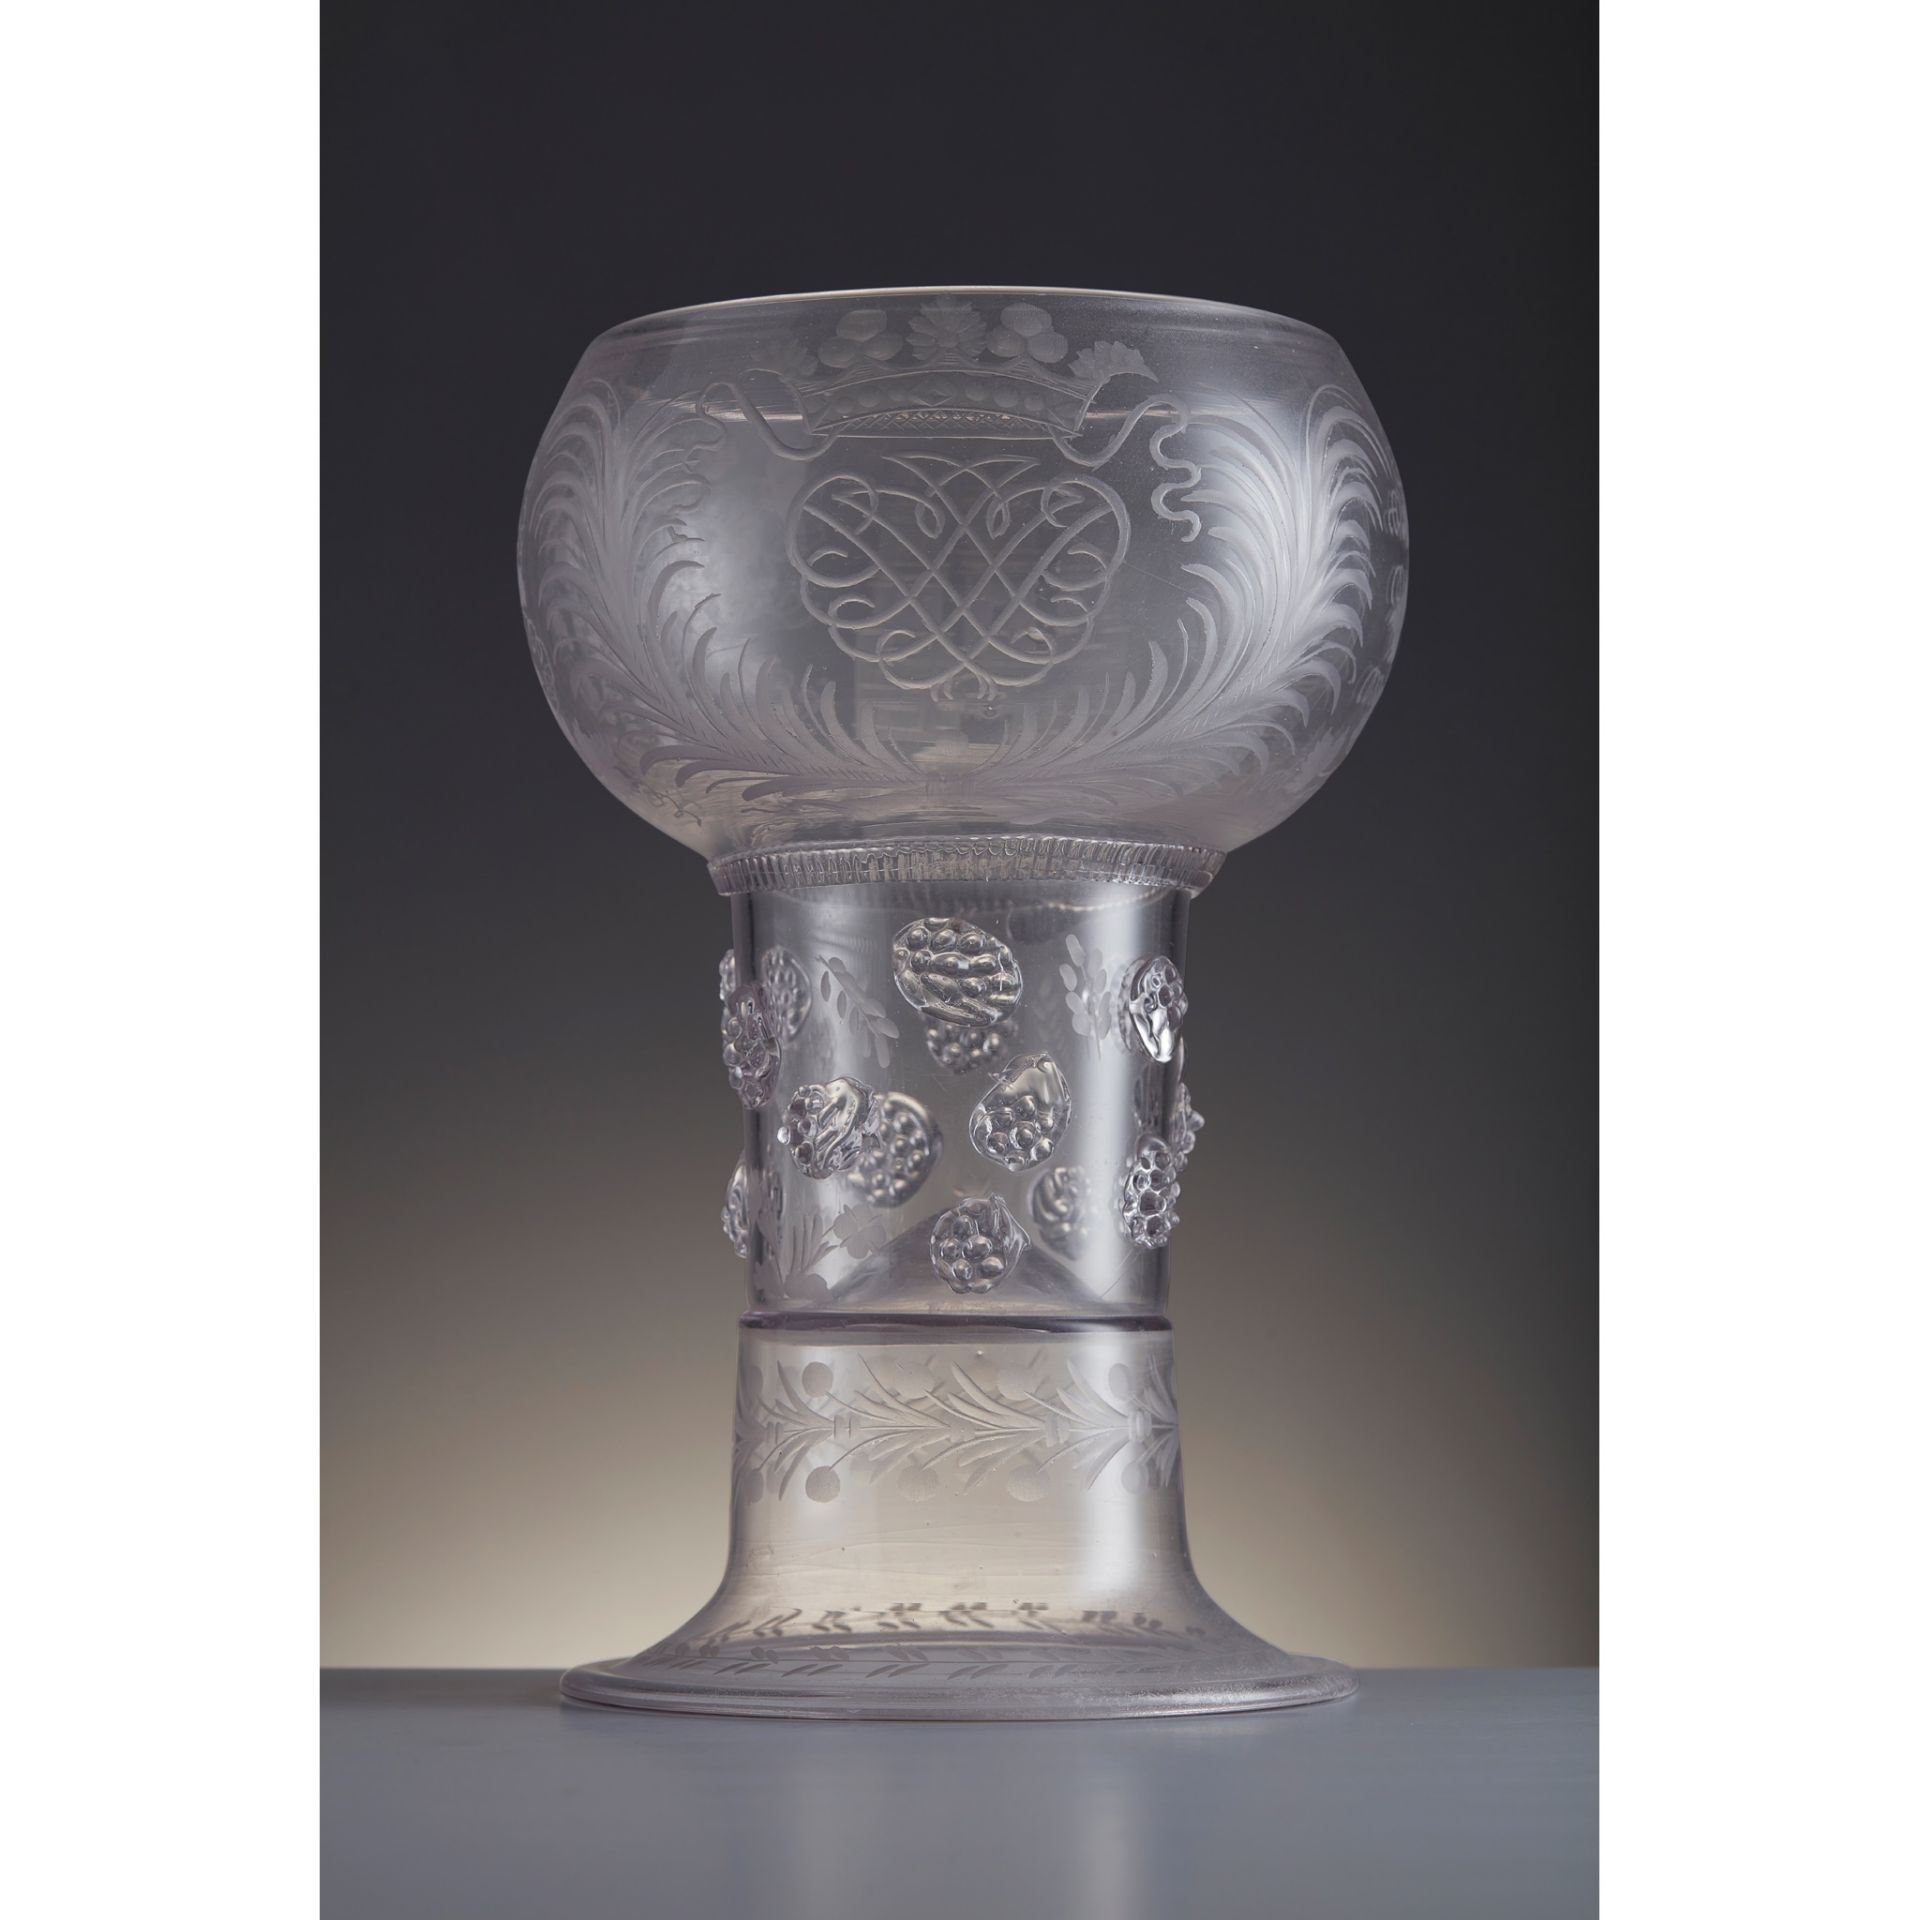 LARGE CLEAR GLASS ROEMER BEARING THE BREADALBANE CYPHER DUTCH OR GERMAN, LATE 17TH / EARLY 18TH - Image 3 of 4